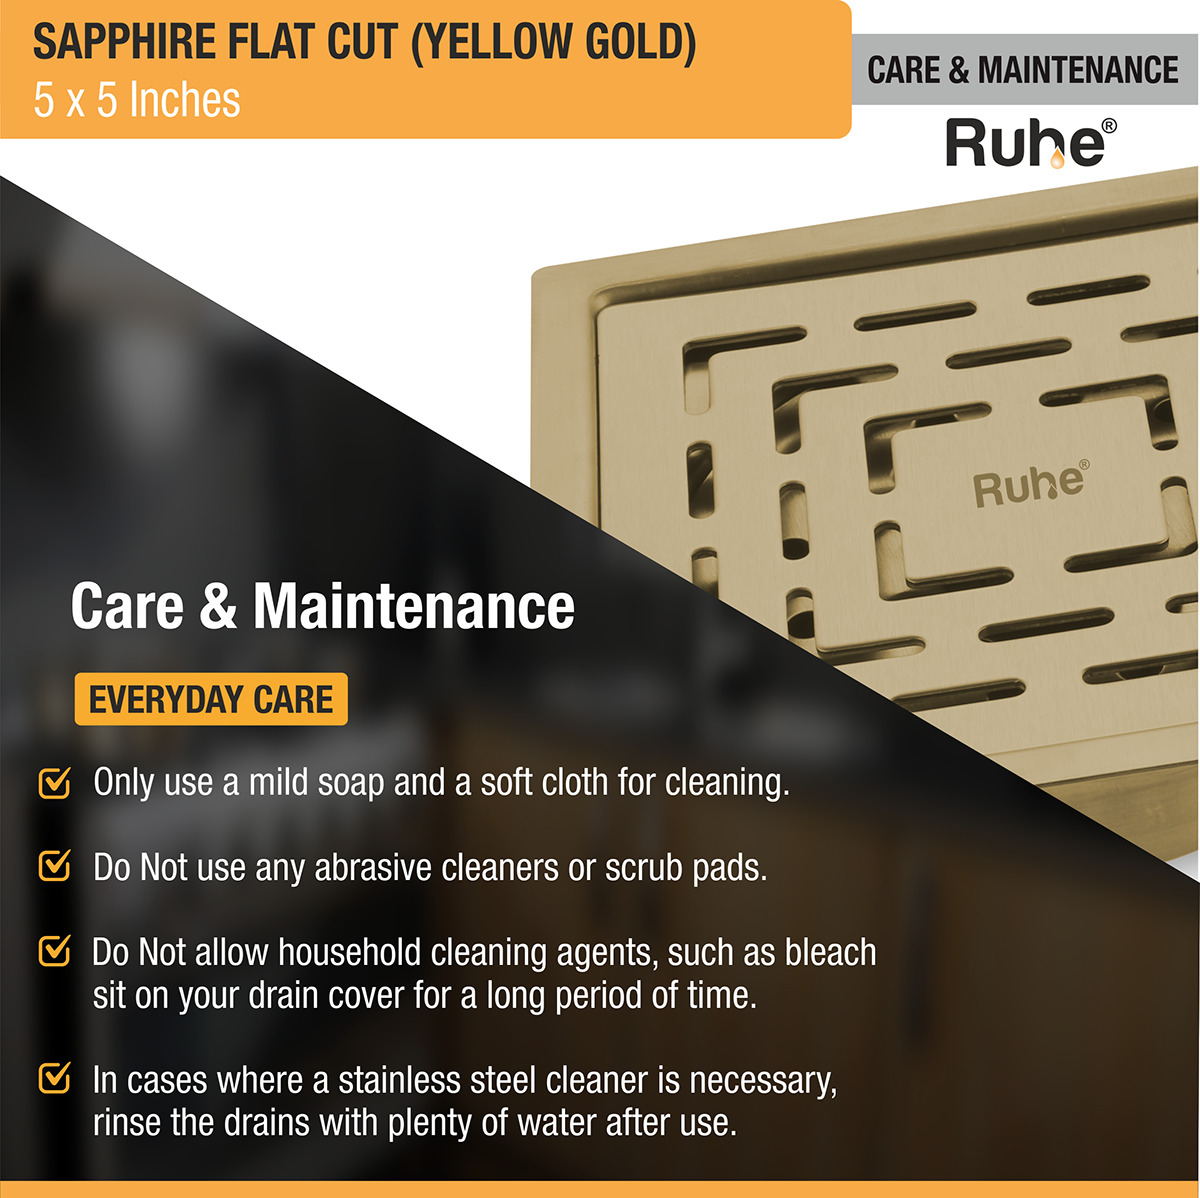 Sapphire Square Flat Cut Floor Drain in Yellow Gold PVD Coating (5 x 5 Inches) care and maintenance